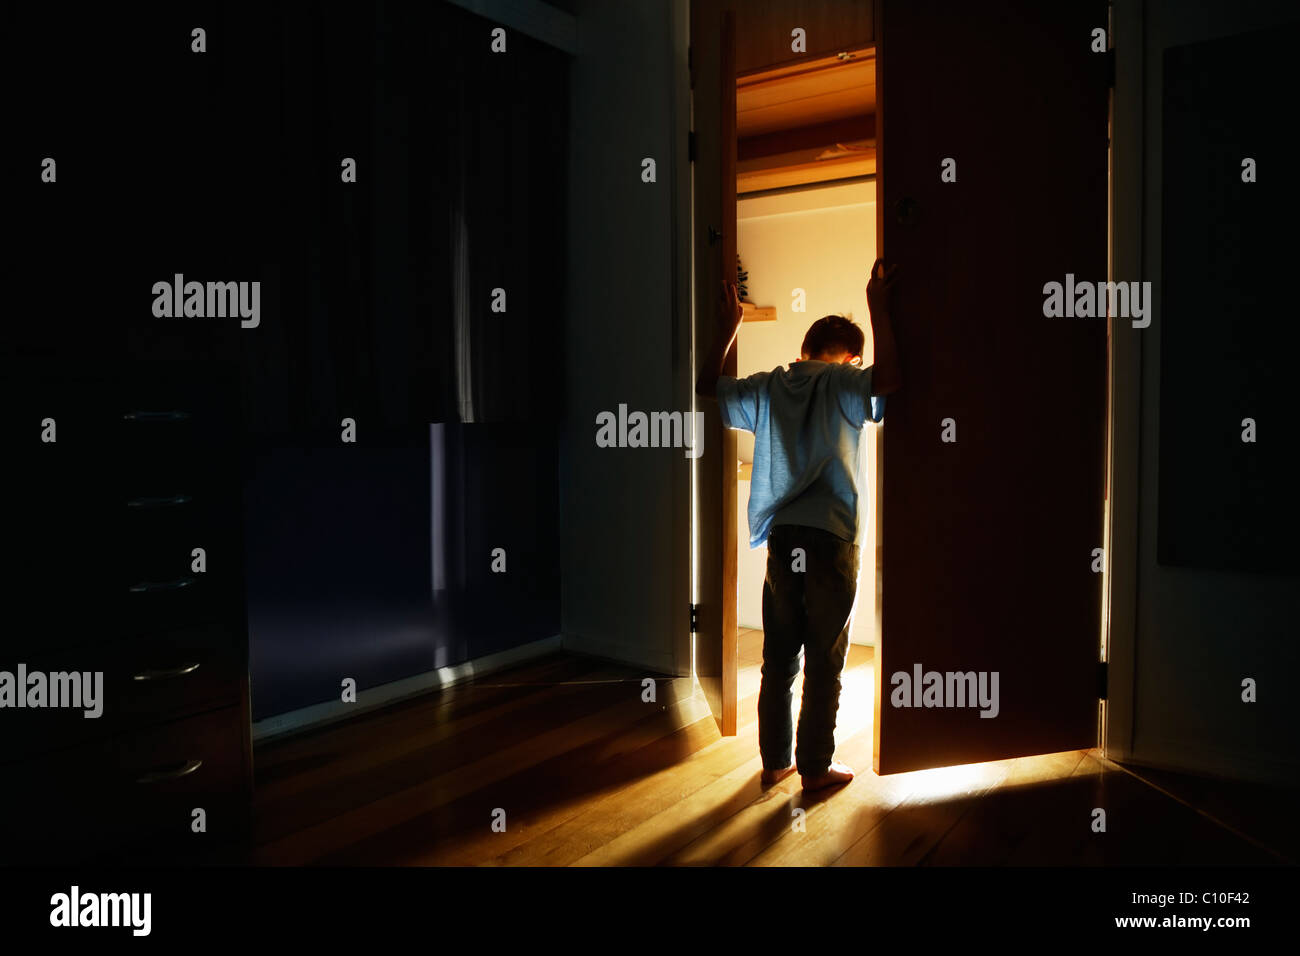 Boy stands at cupboard doors lit from within Stock Photo